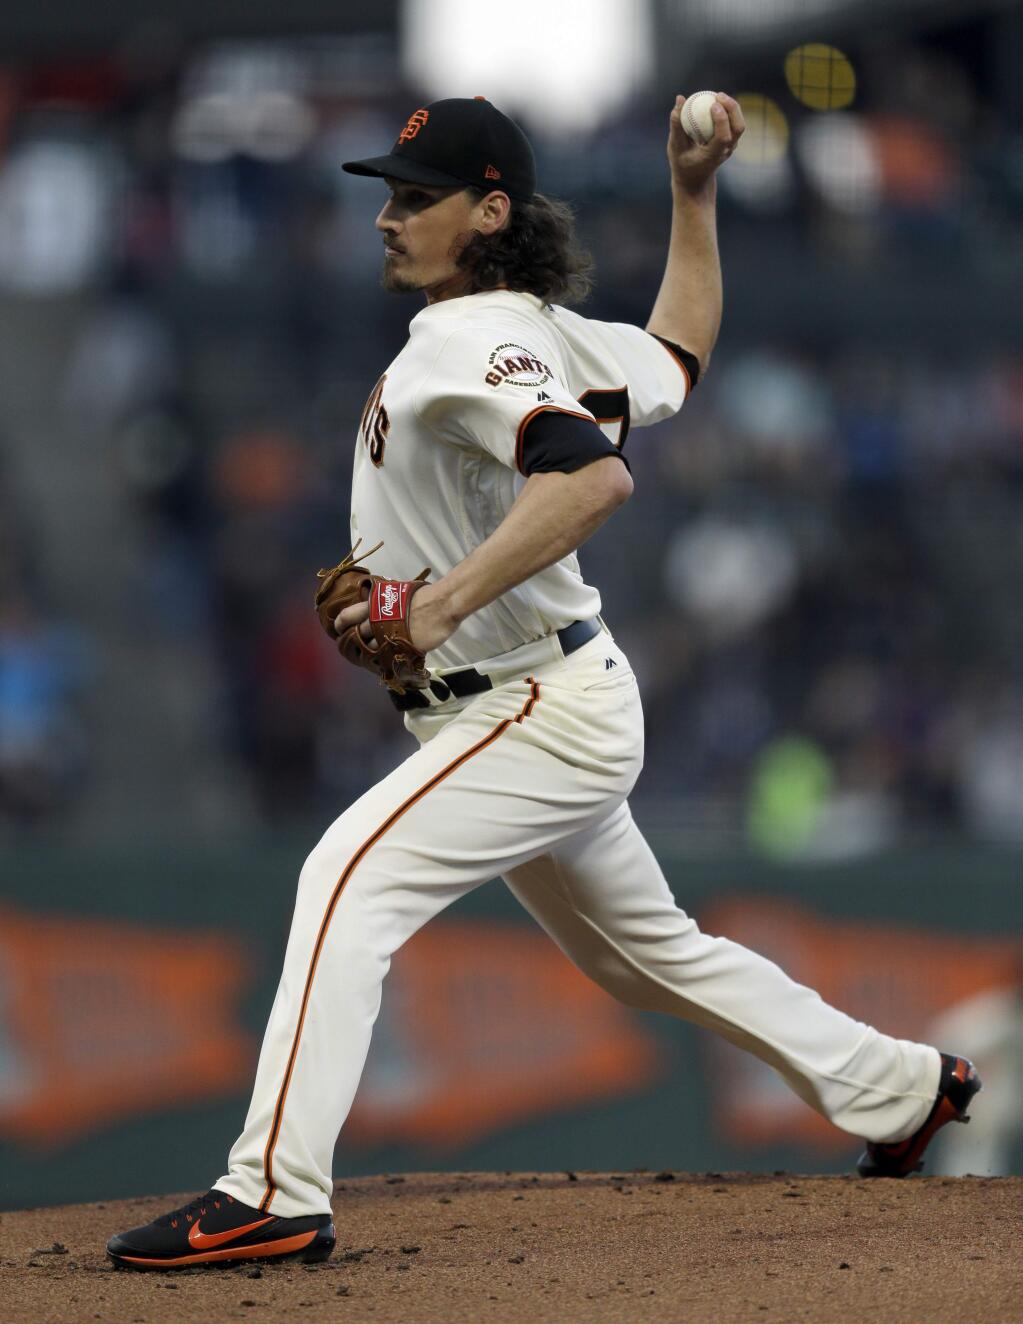 San Francisco Giants pitcher Jeff Samardzija works against the Milwaukee Brewers during the first inning of a baseball game Tuesday, Aug. 22, 2017, in San Francisco. (AP Photo/Ben Margot)